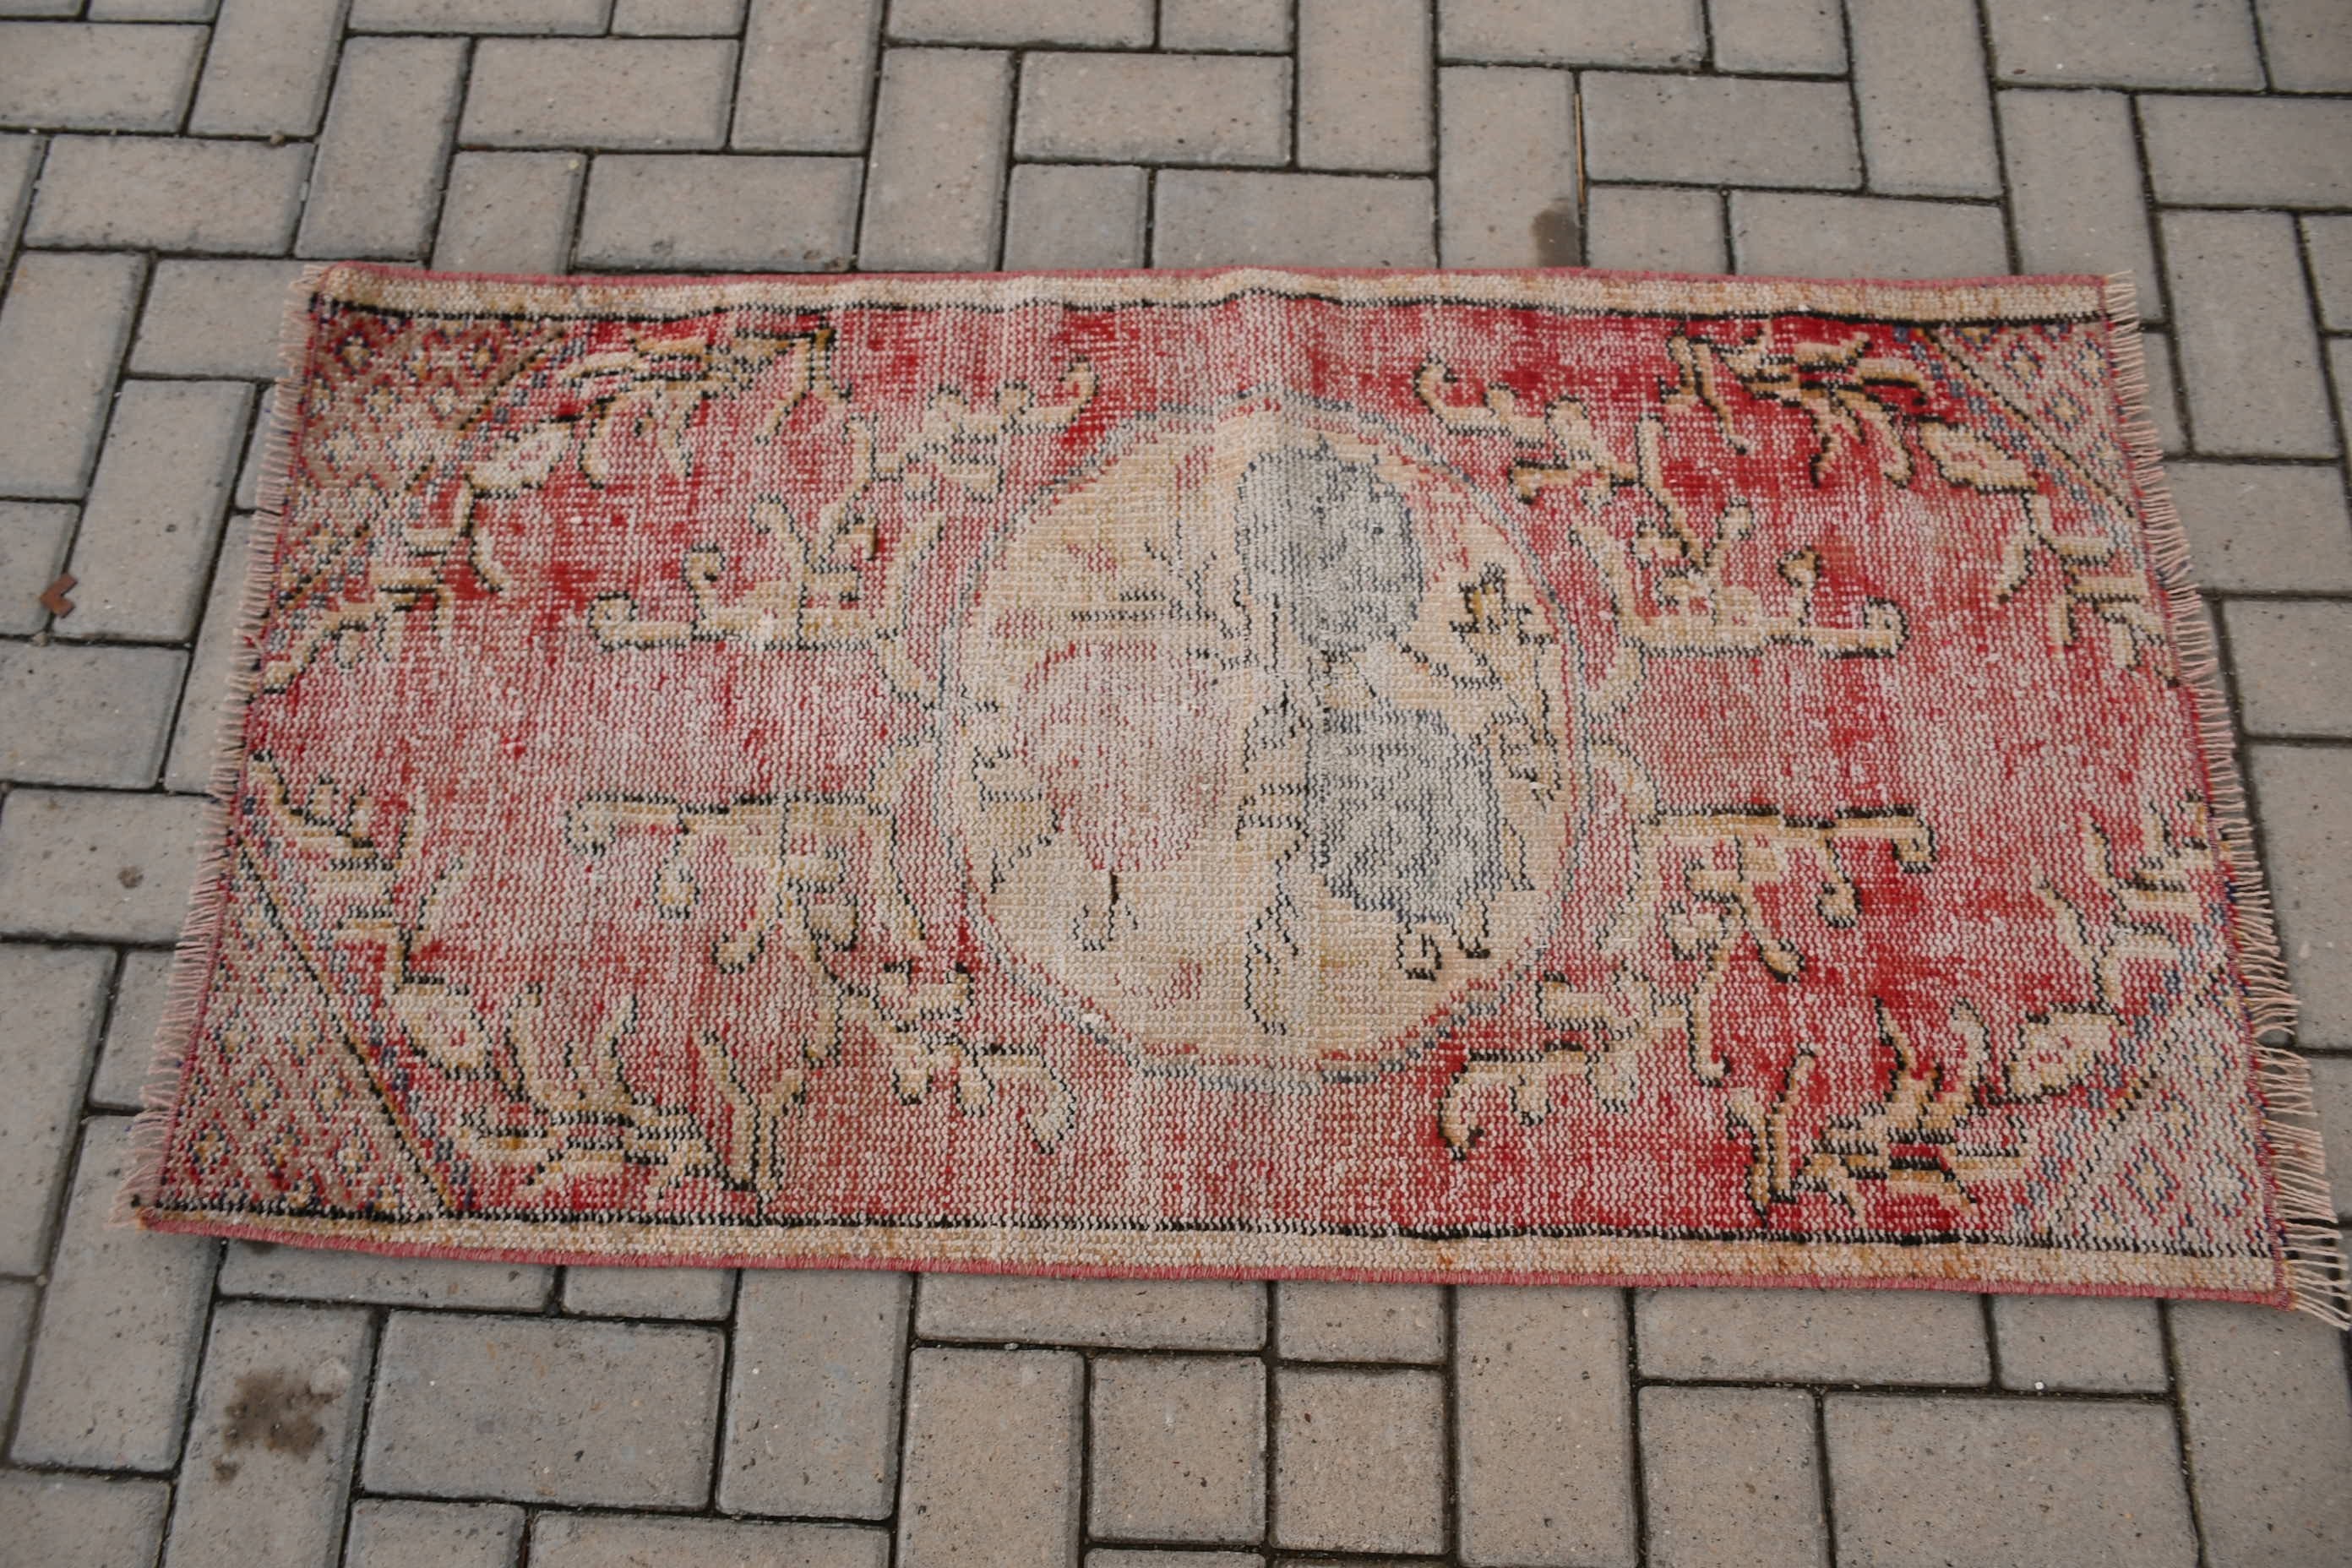 Turkish Rug, 2.2x4 ft Small Rug, Home Decor Rug, Red Antique Rugs, Entry Rugs, Aztec Rug, Rugs for Bedroom, Vintage Rug, Kitchen Rugs